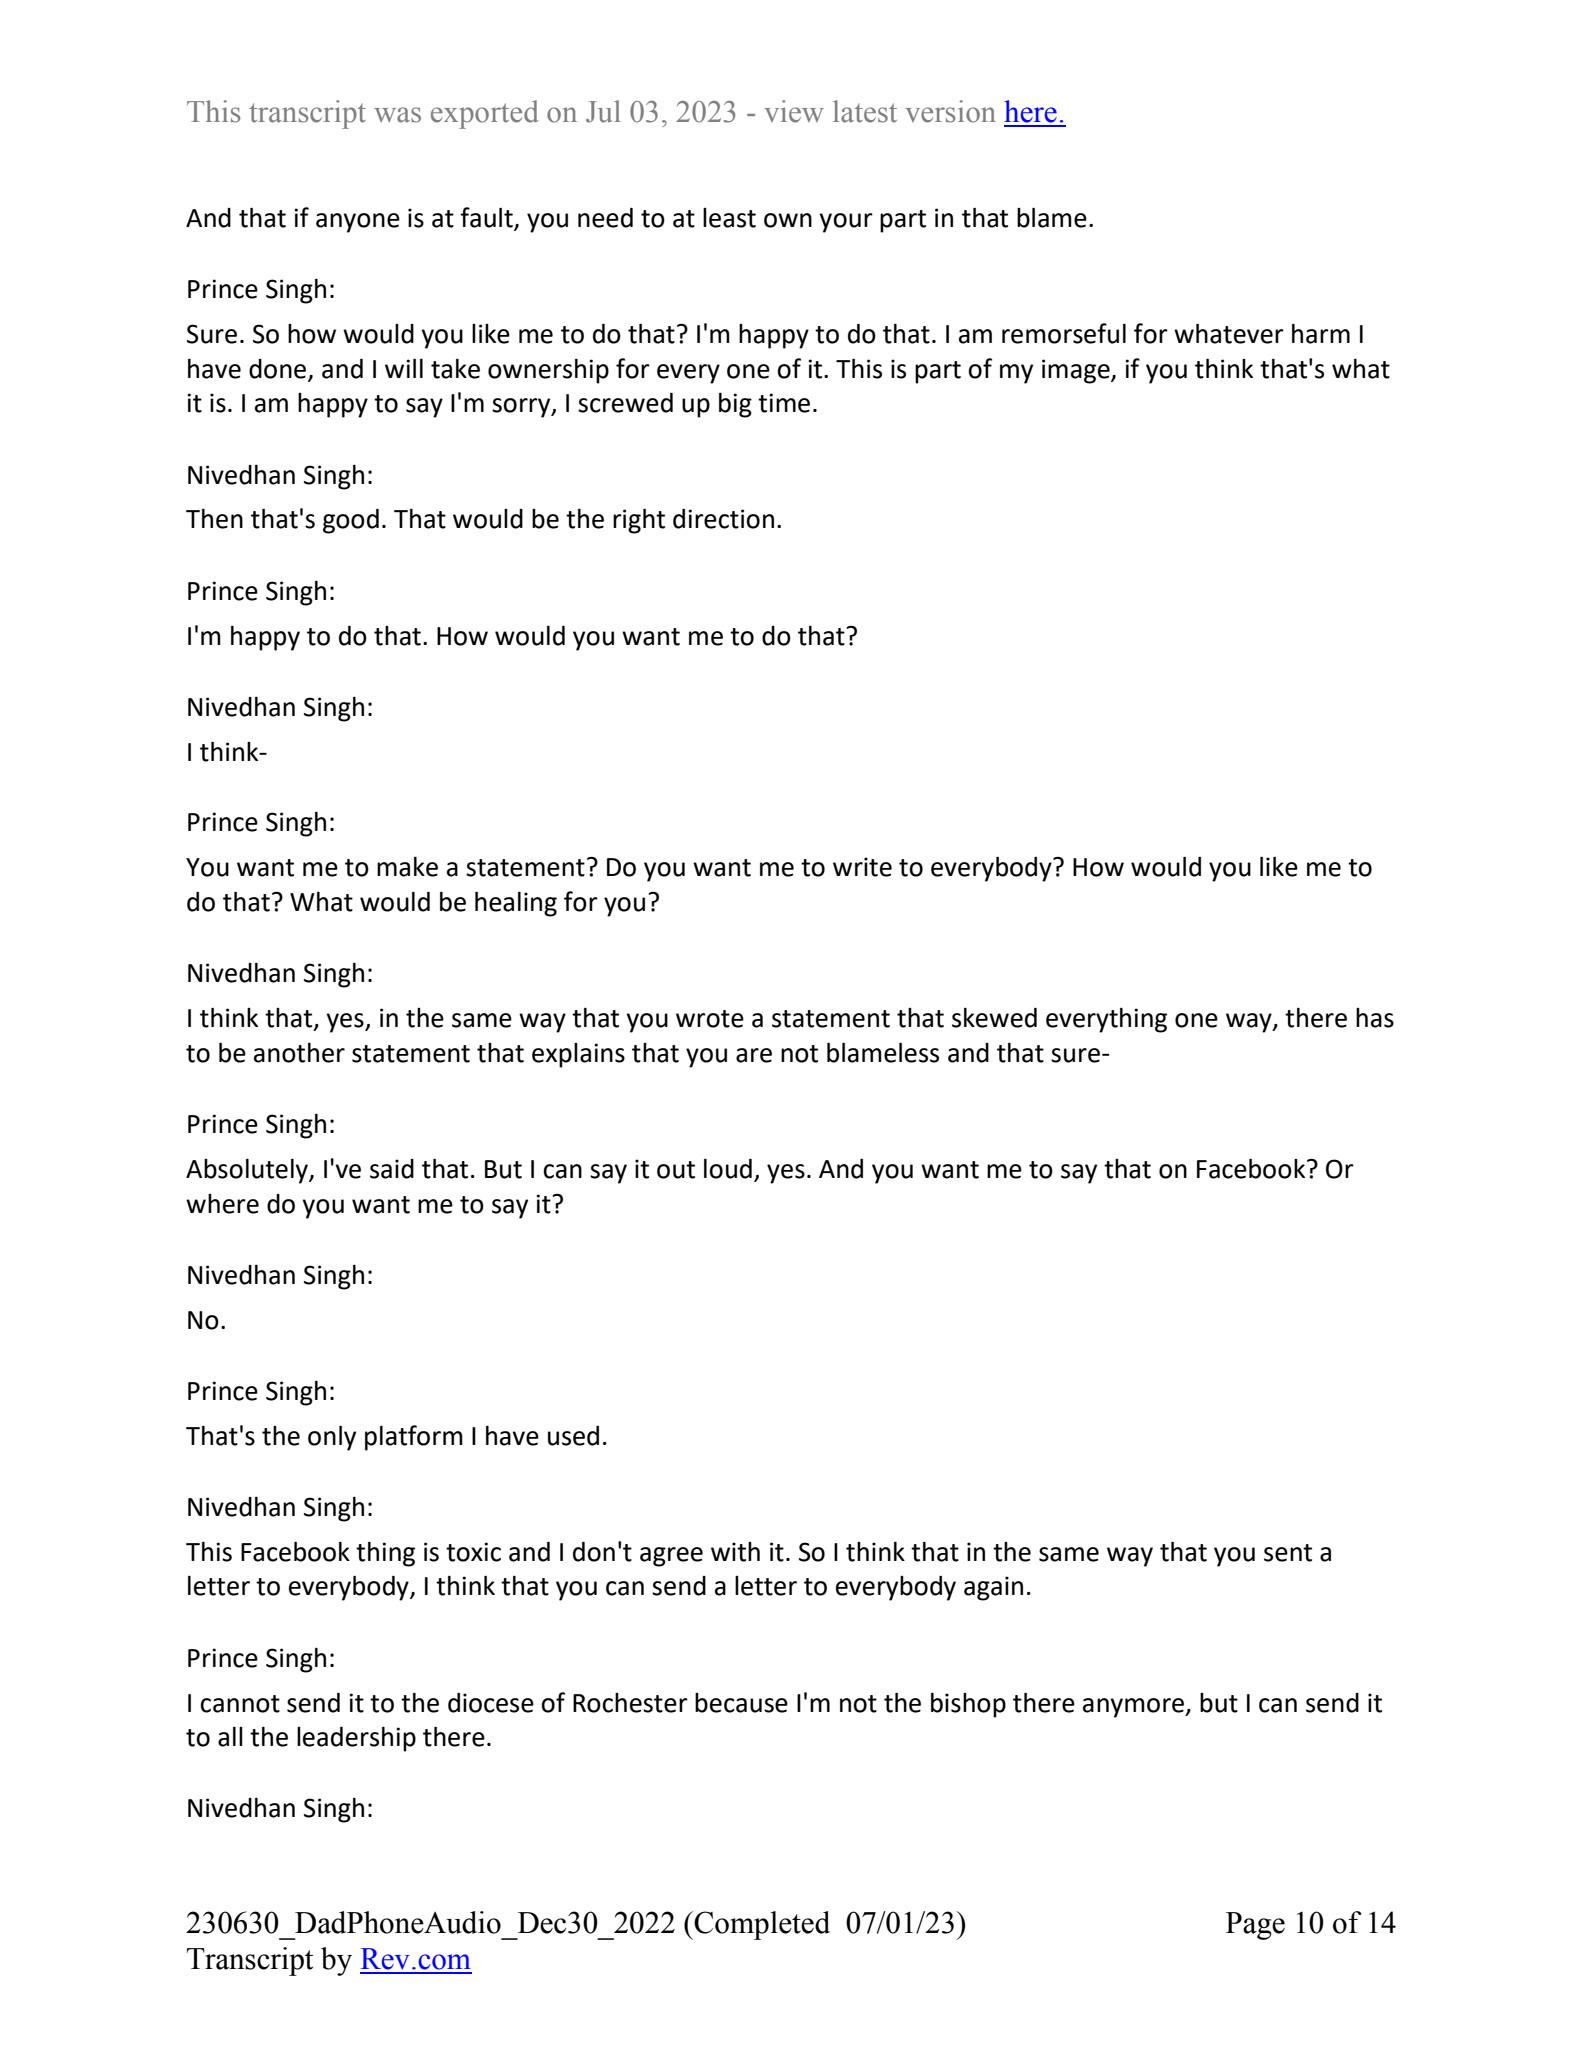 December 30th, 2022 phone call transcript - Page 10